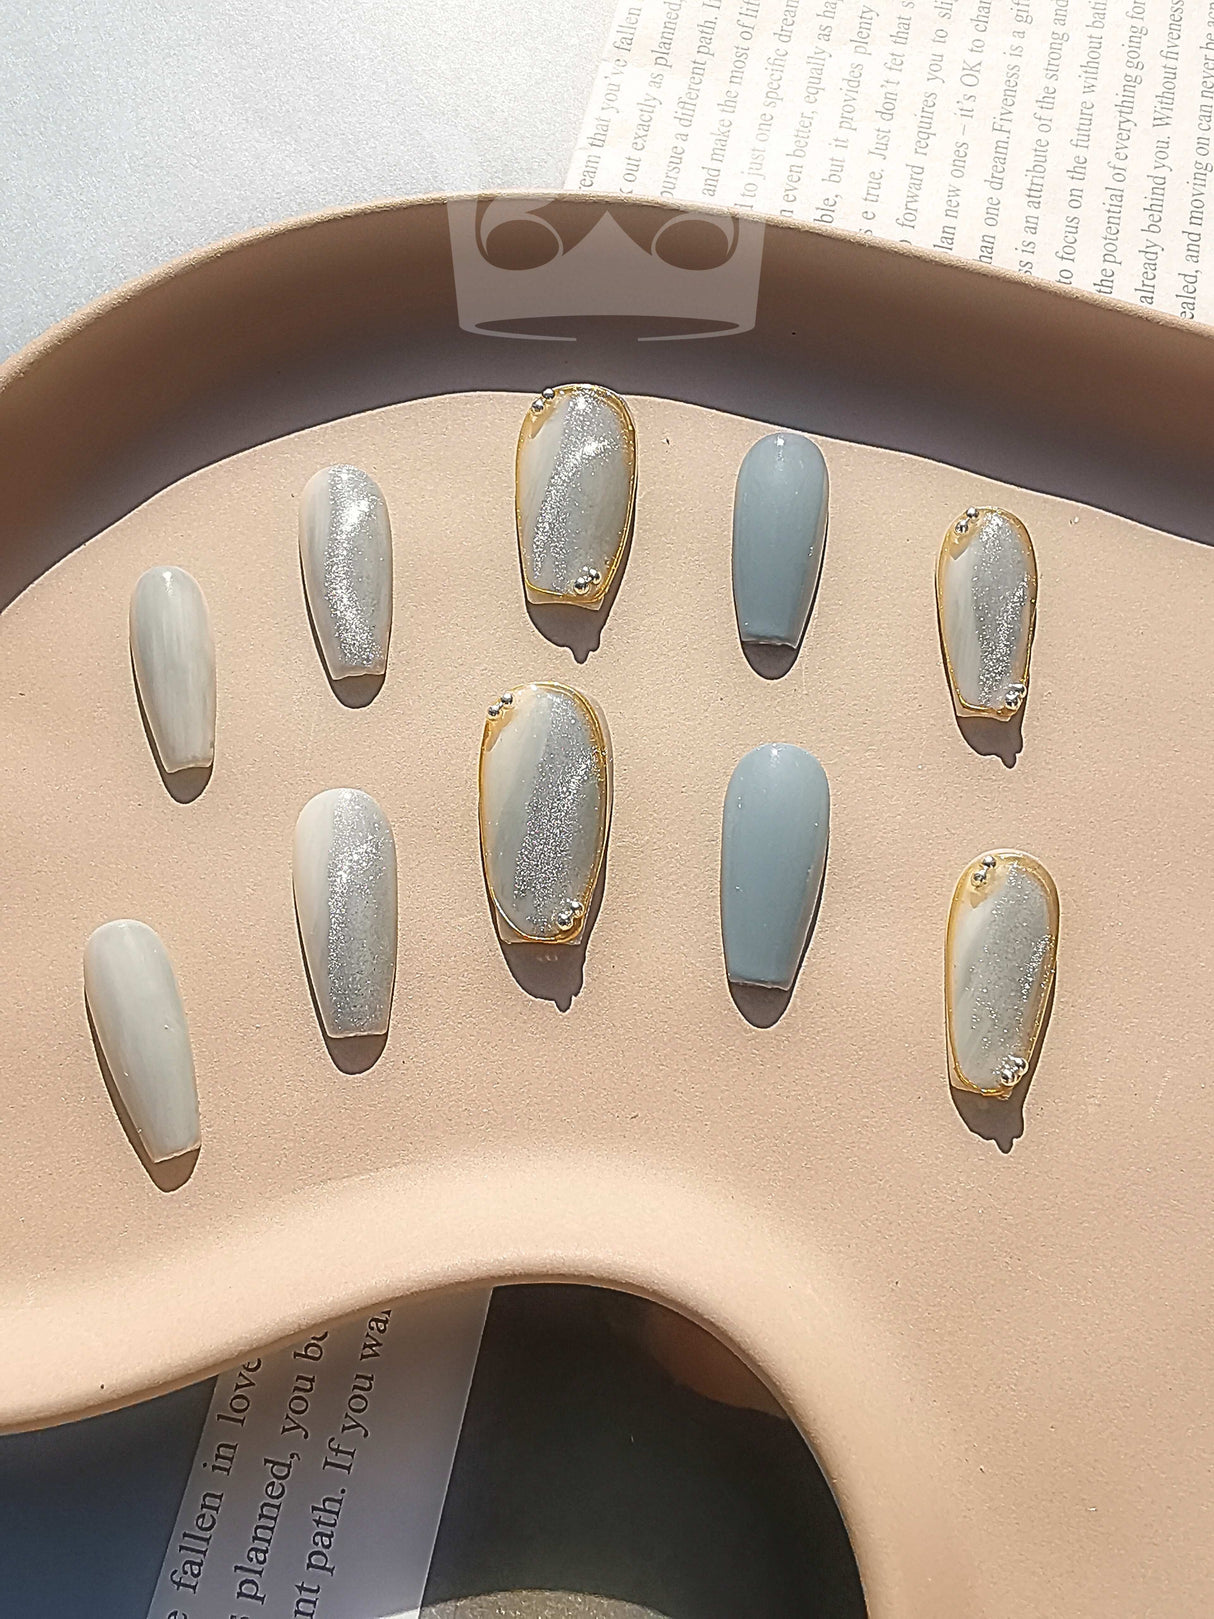 These press-on nails are designed for special occasions or fashion statements with a soft color palette, oval shape, two-tone design, metallic accent, gold detailing, and texture contrast.